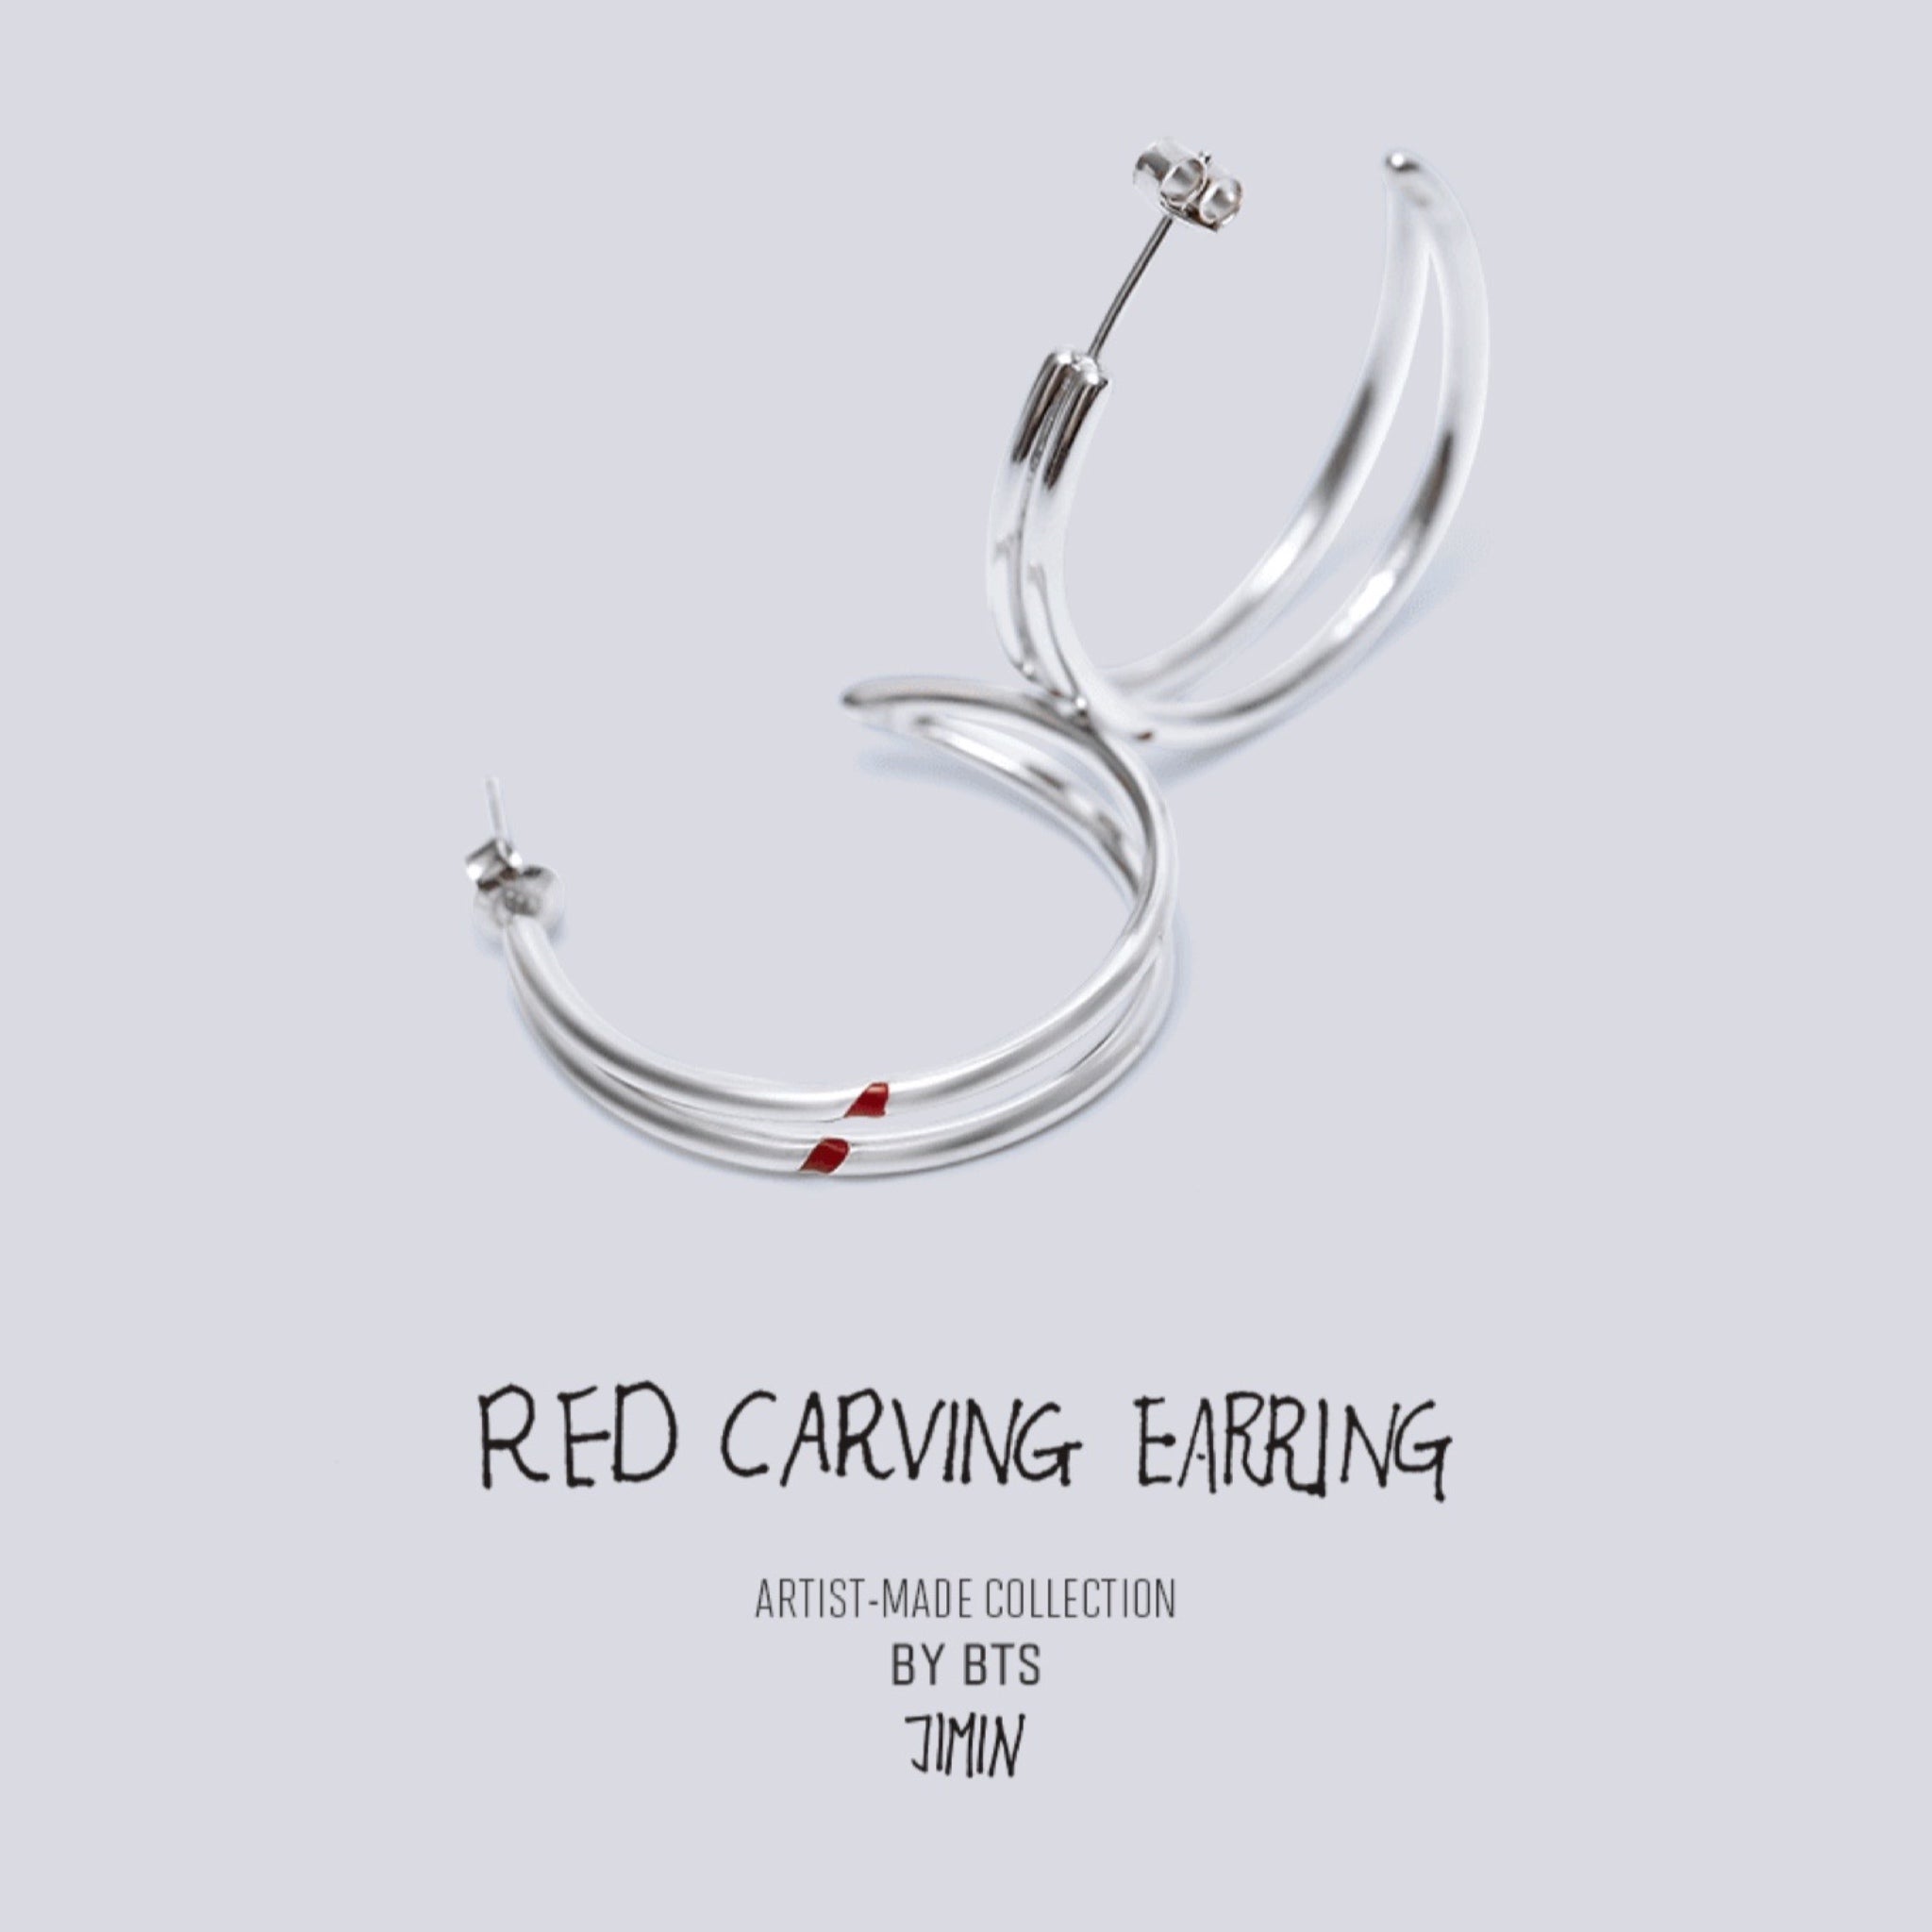 BTS JIMIN RED CARVING EARRING 可能な限り早く発送 | www ...